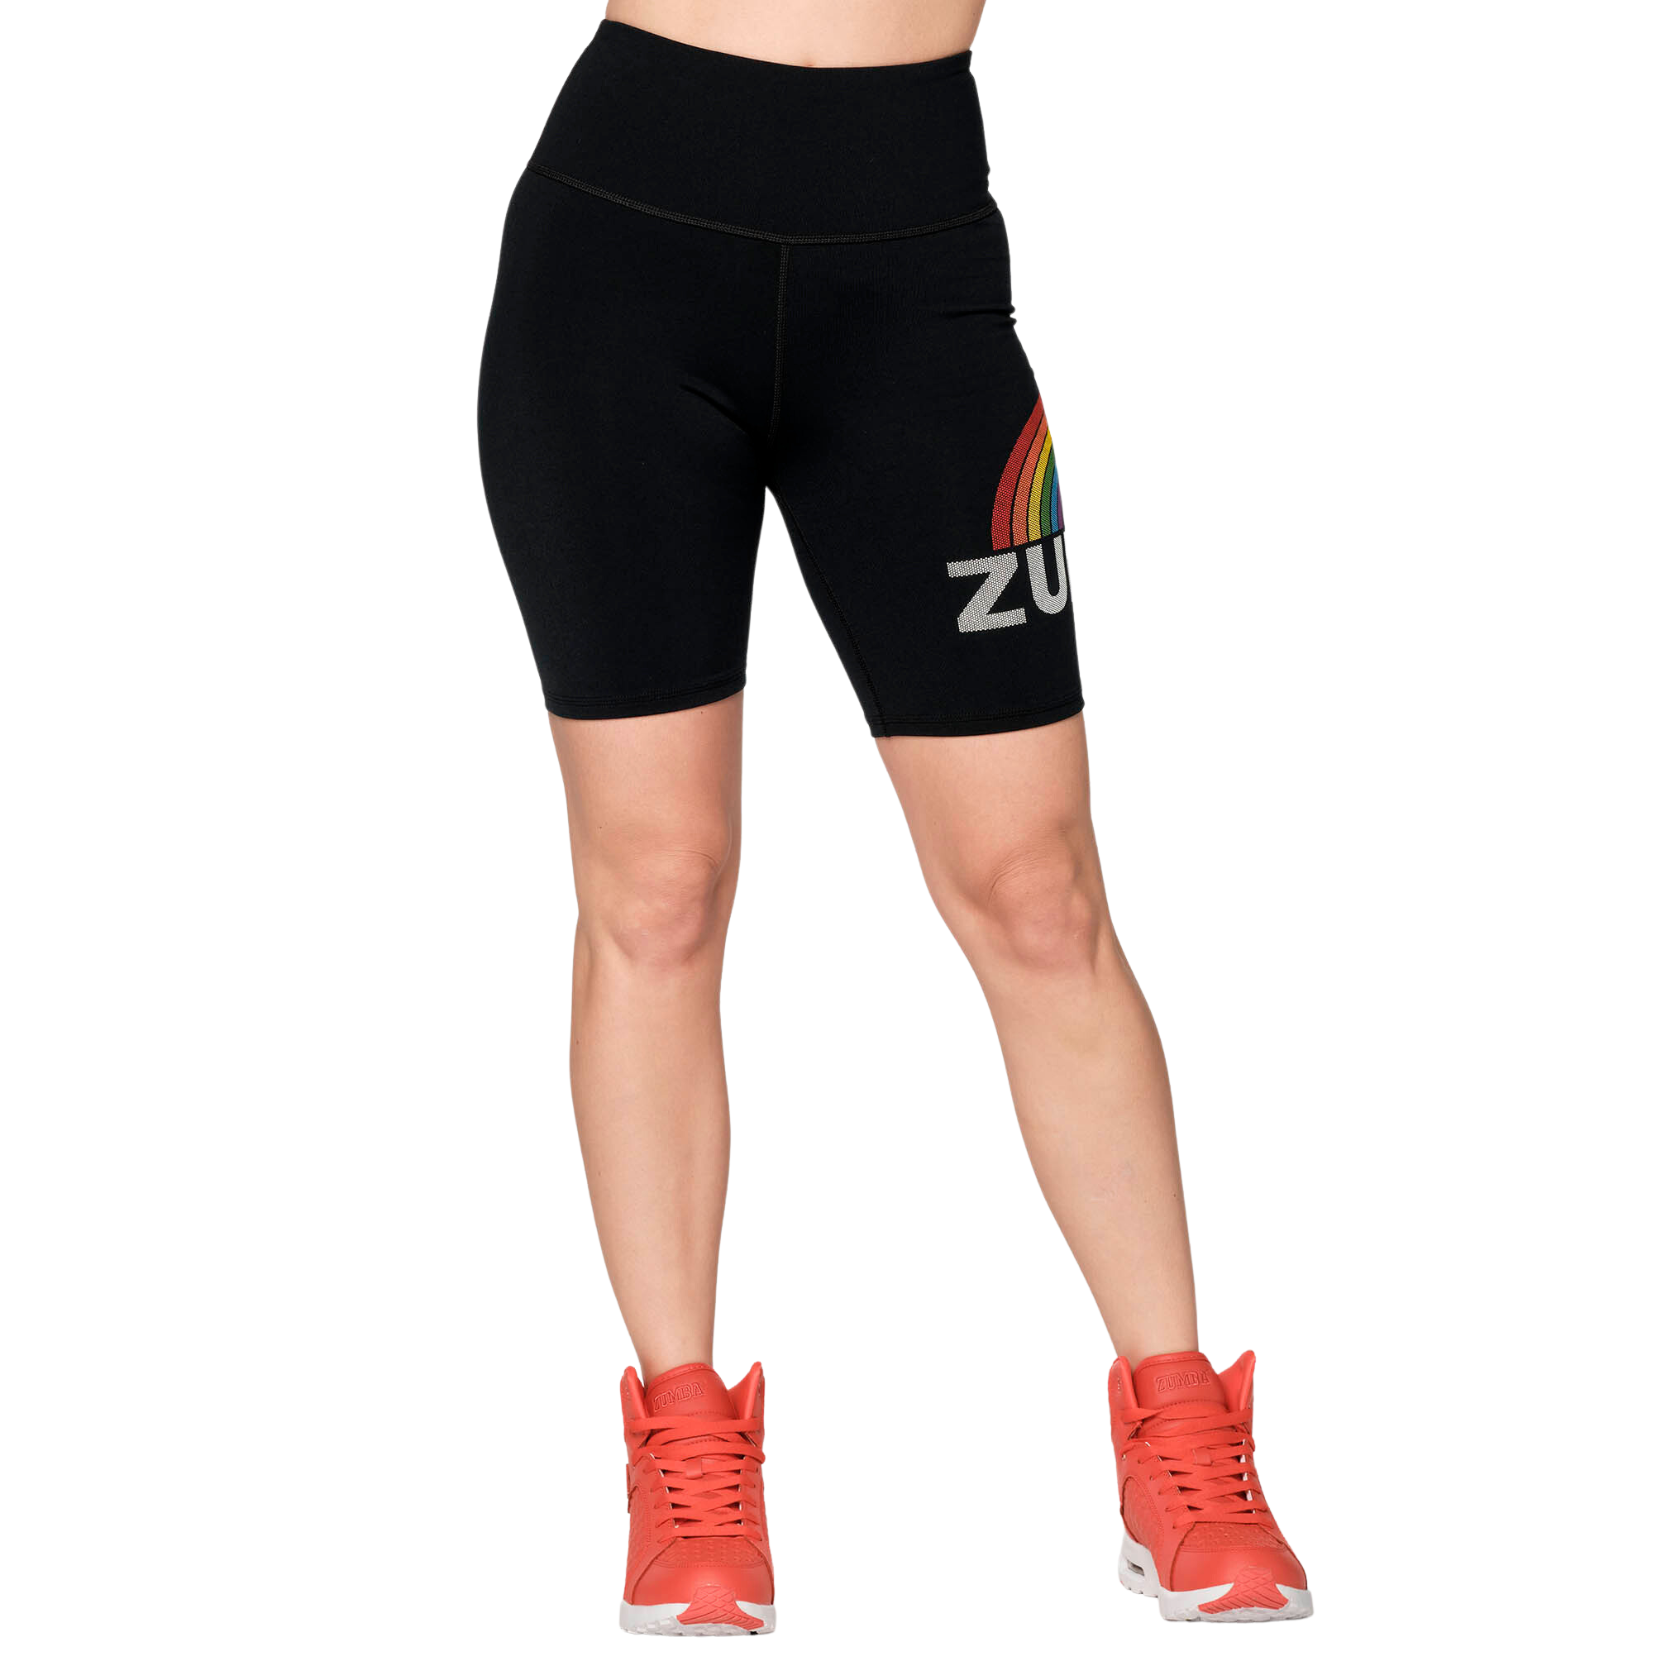 Zumba With Pride High Waisted Biker Shorts (Special Order)